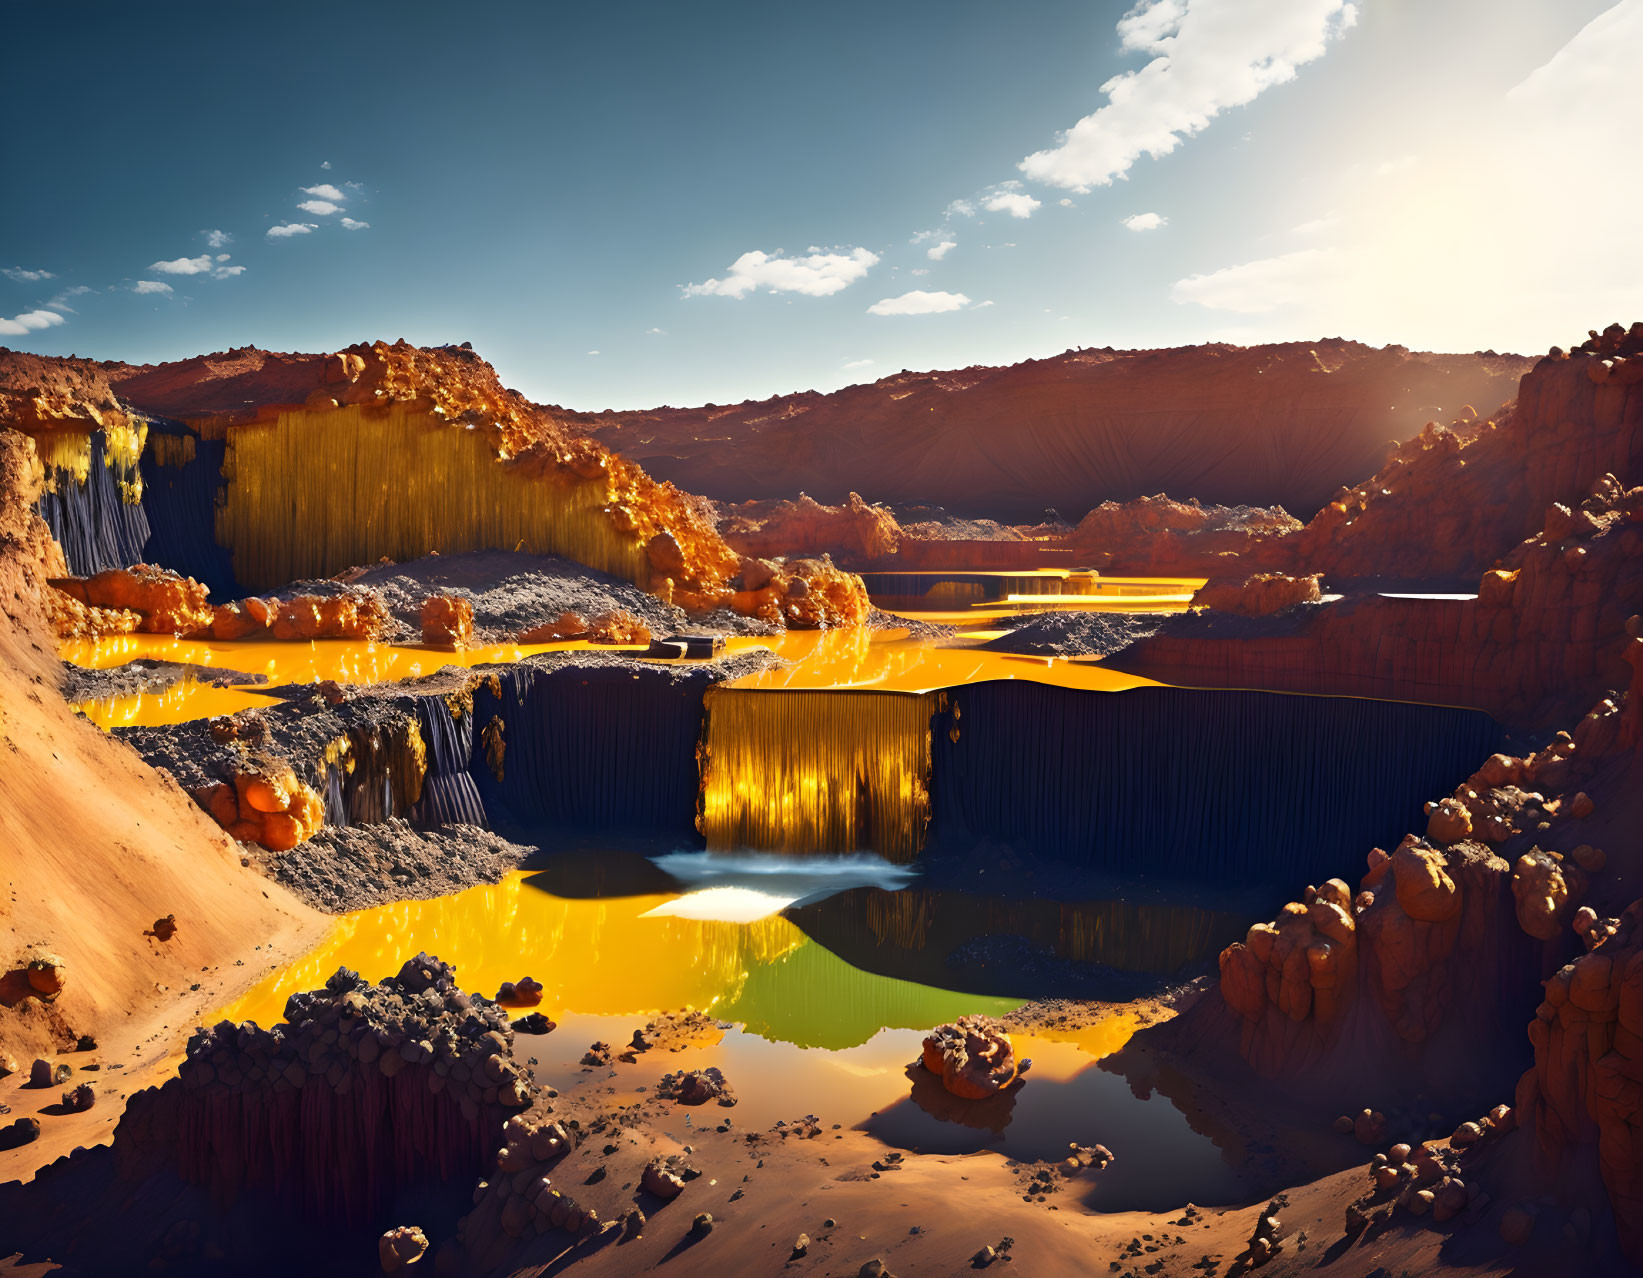 Surreal landscape with golden rivers, reflective pools, and colorful terrain